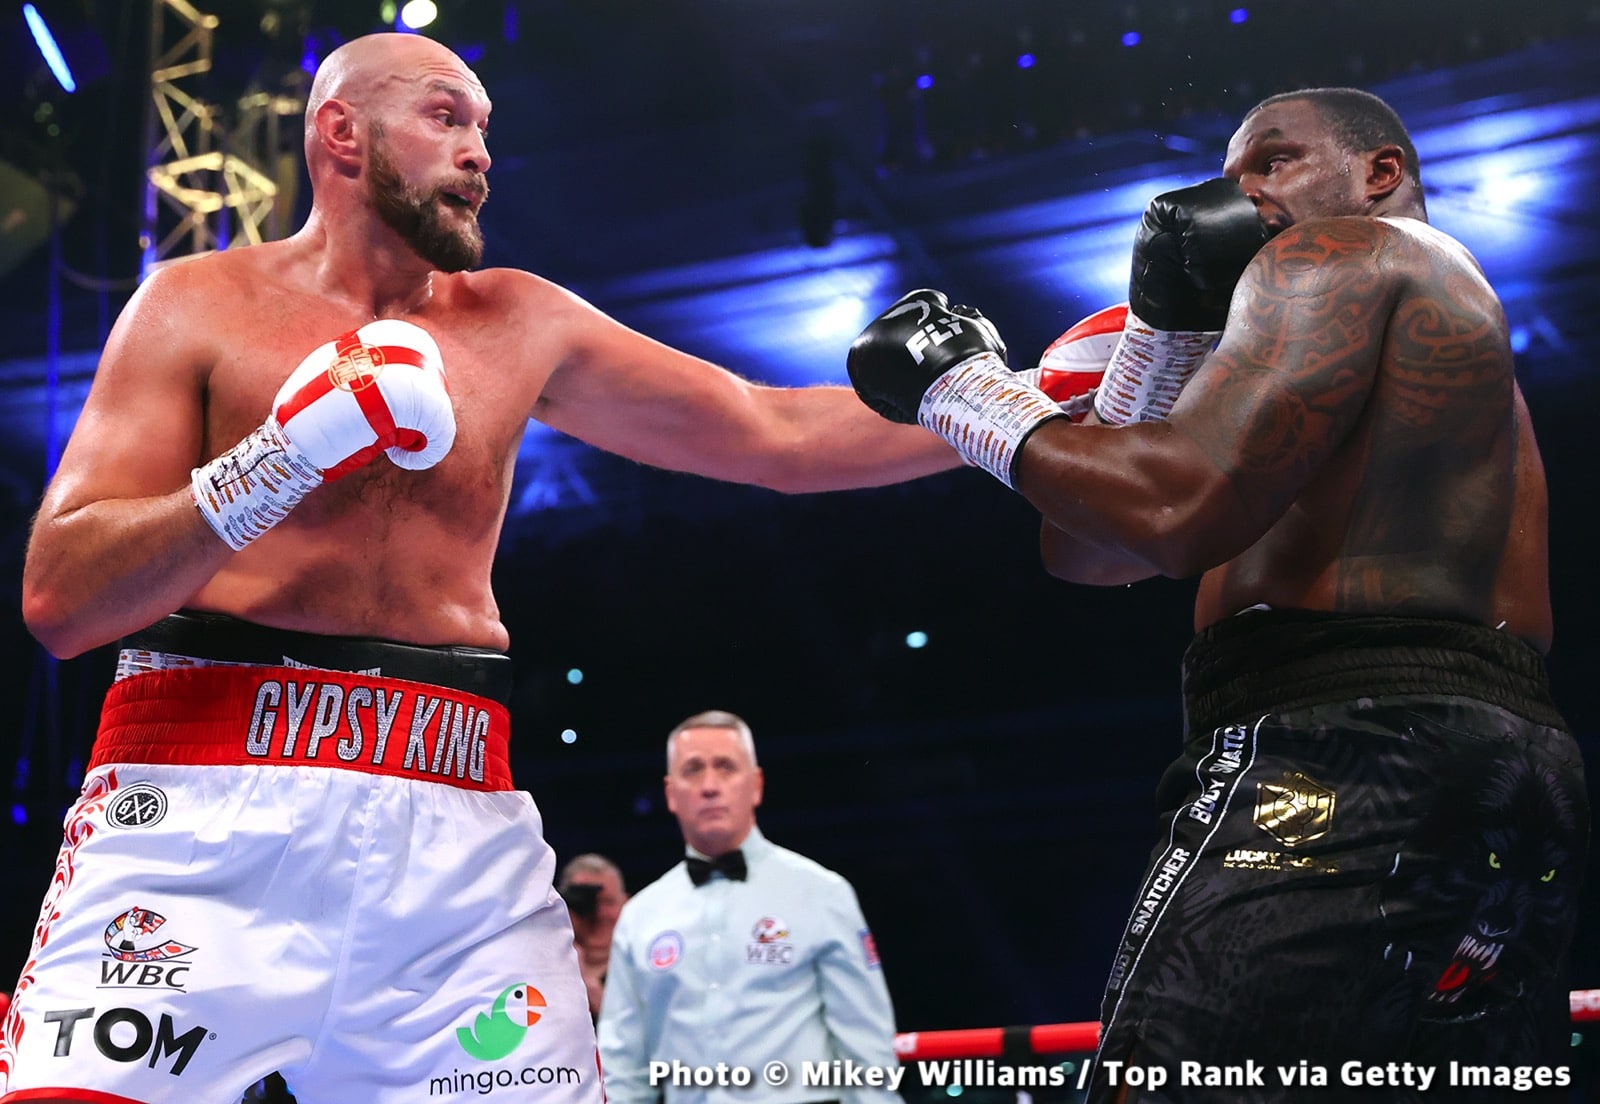 Image: Tyson Fury tells Dereck Chisora: "Get the f**** contract signed"